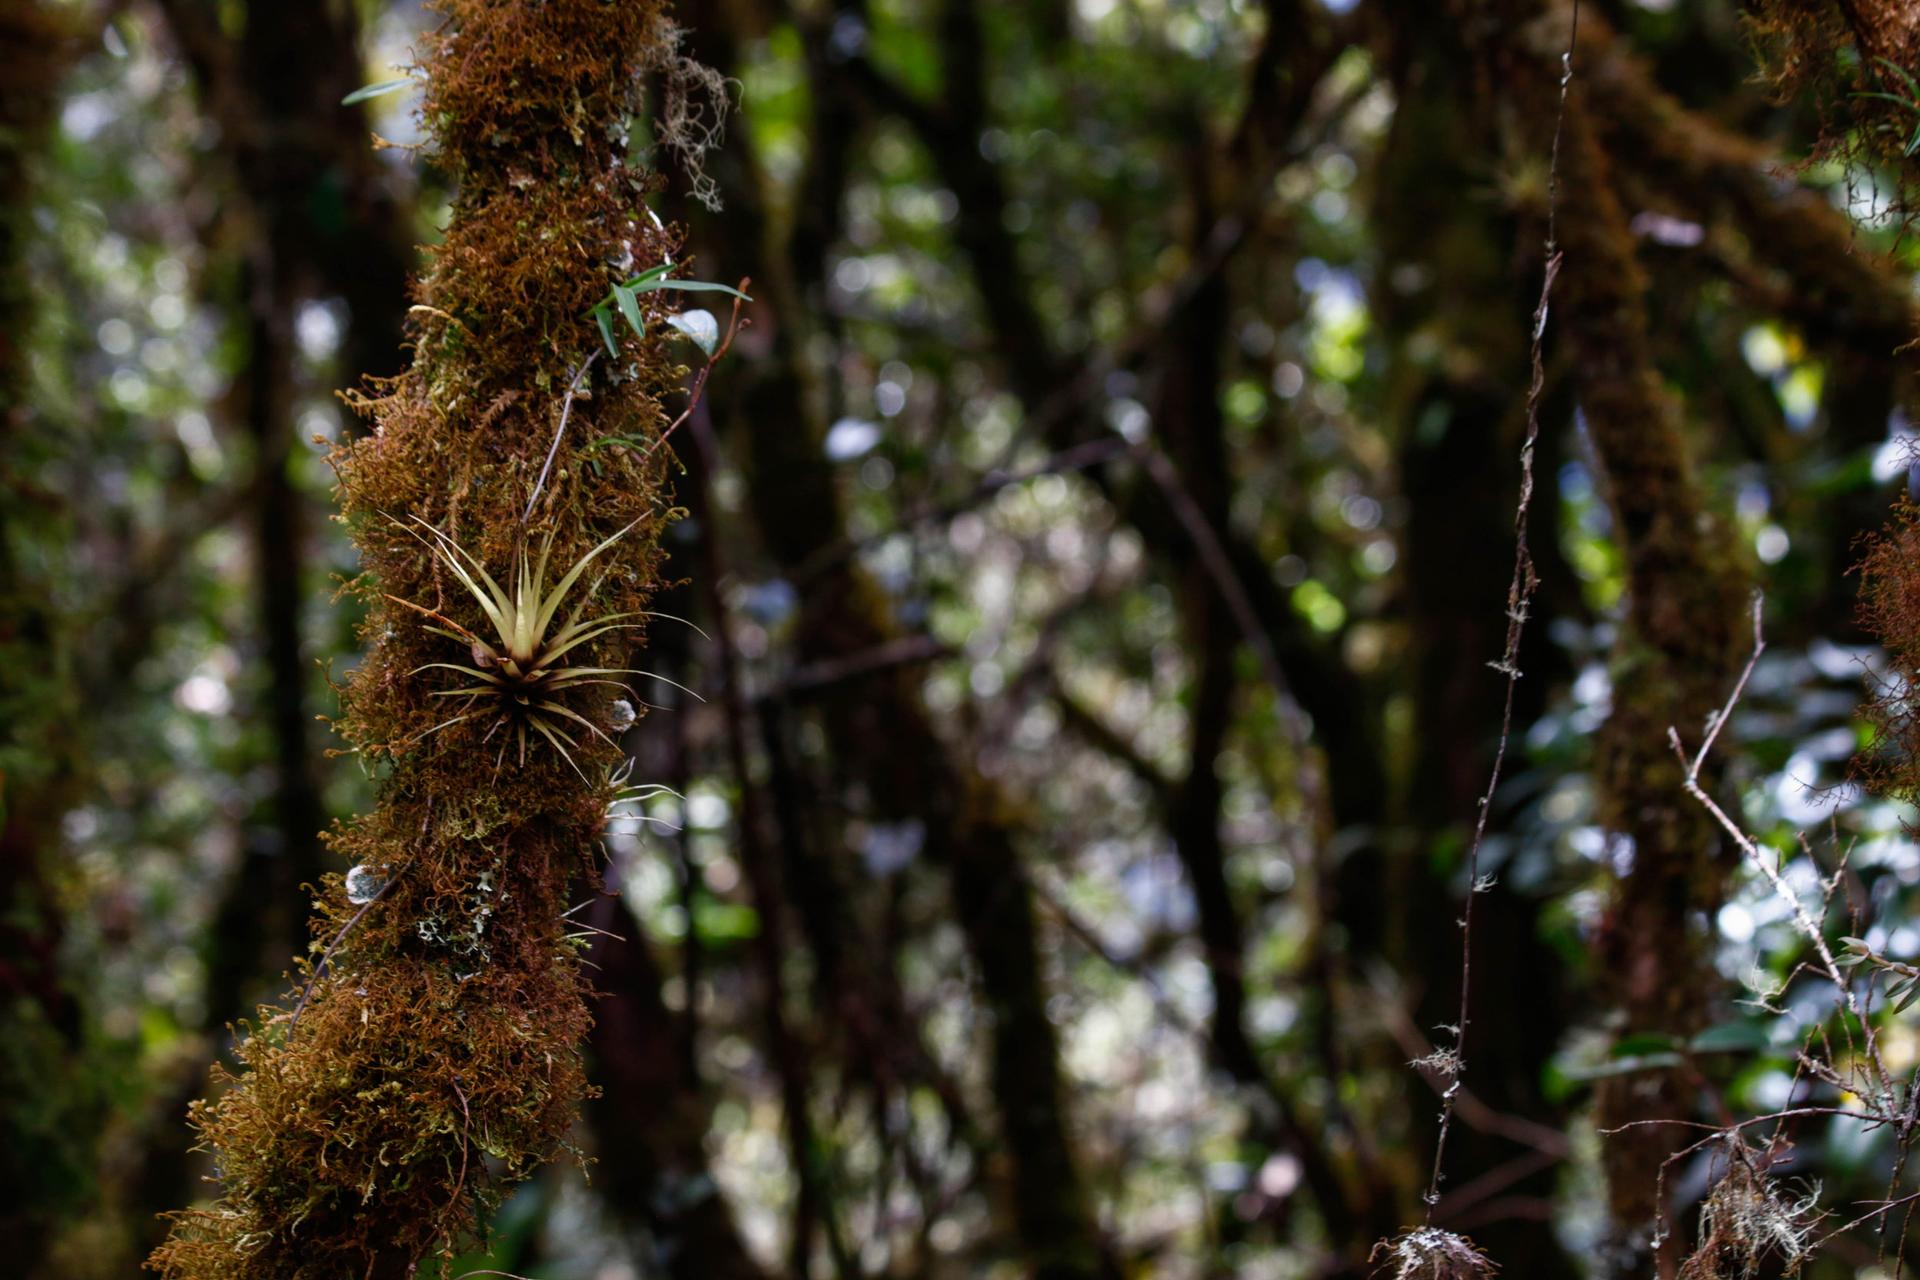 A close-up photograph of the bromeliads and mosses of the cloud forest.